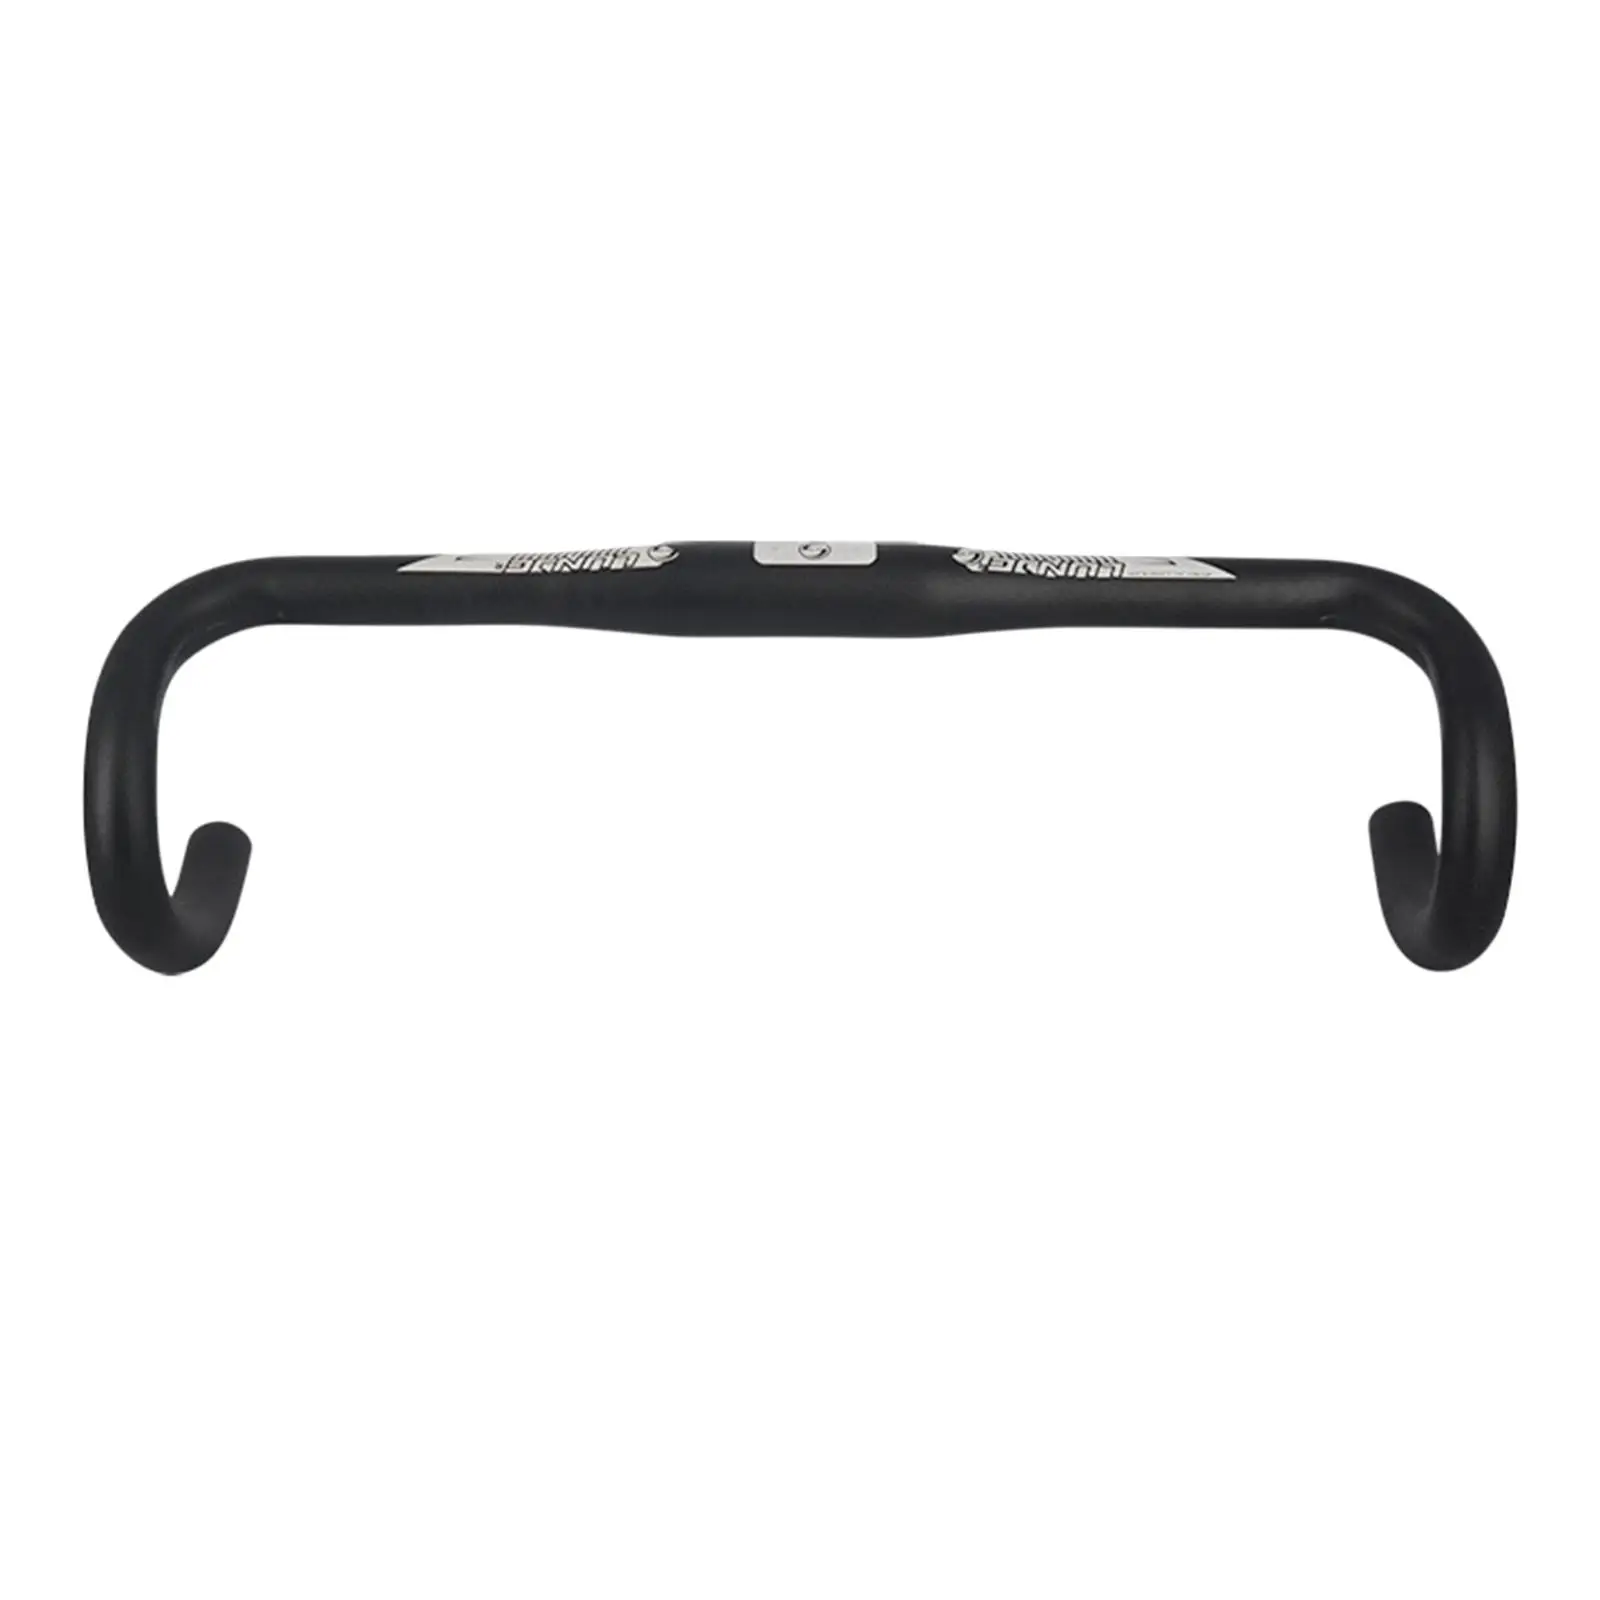 Road Bike Handlebar Easy Install Internal Routing Drop Bar for Cycling Accessories